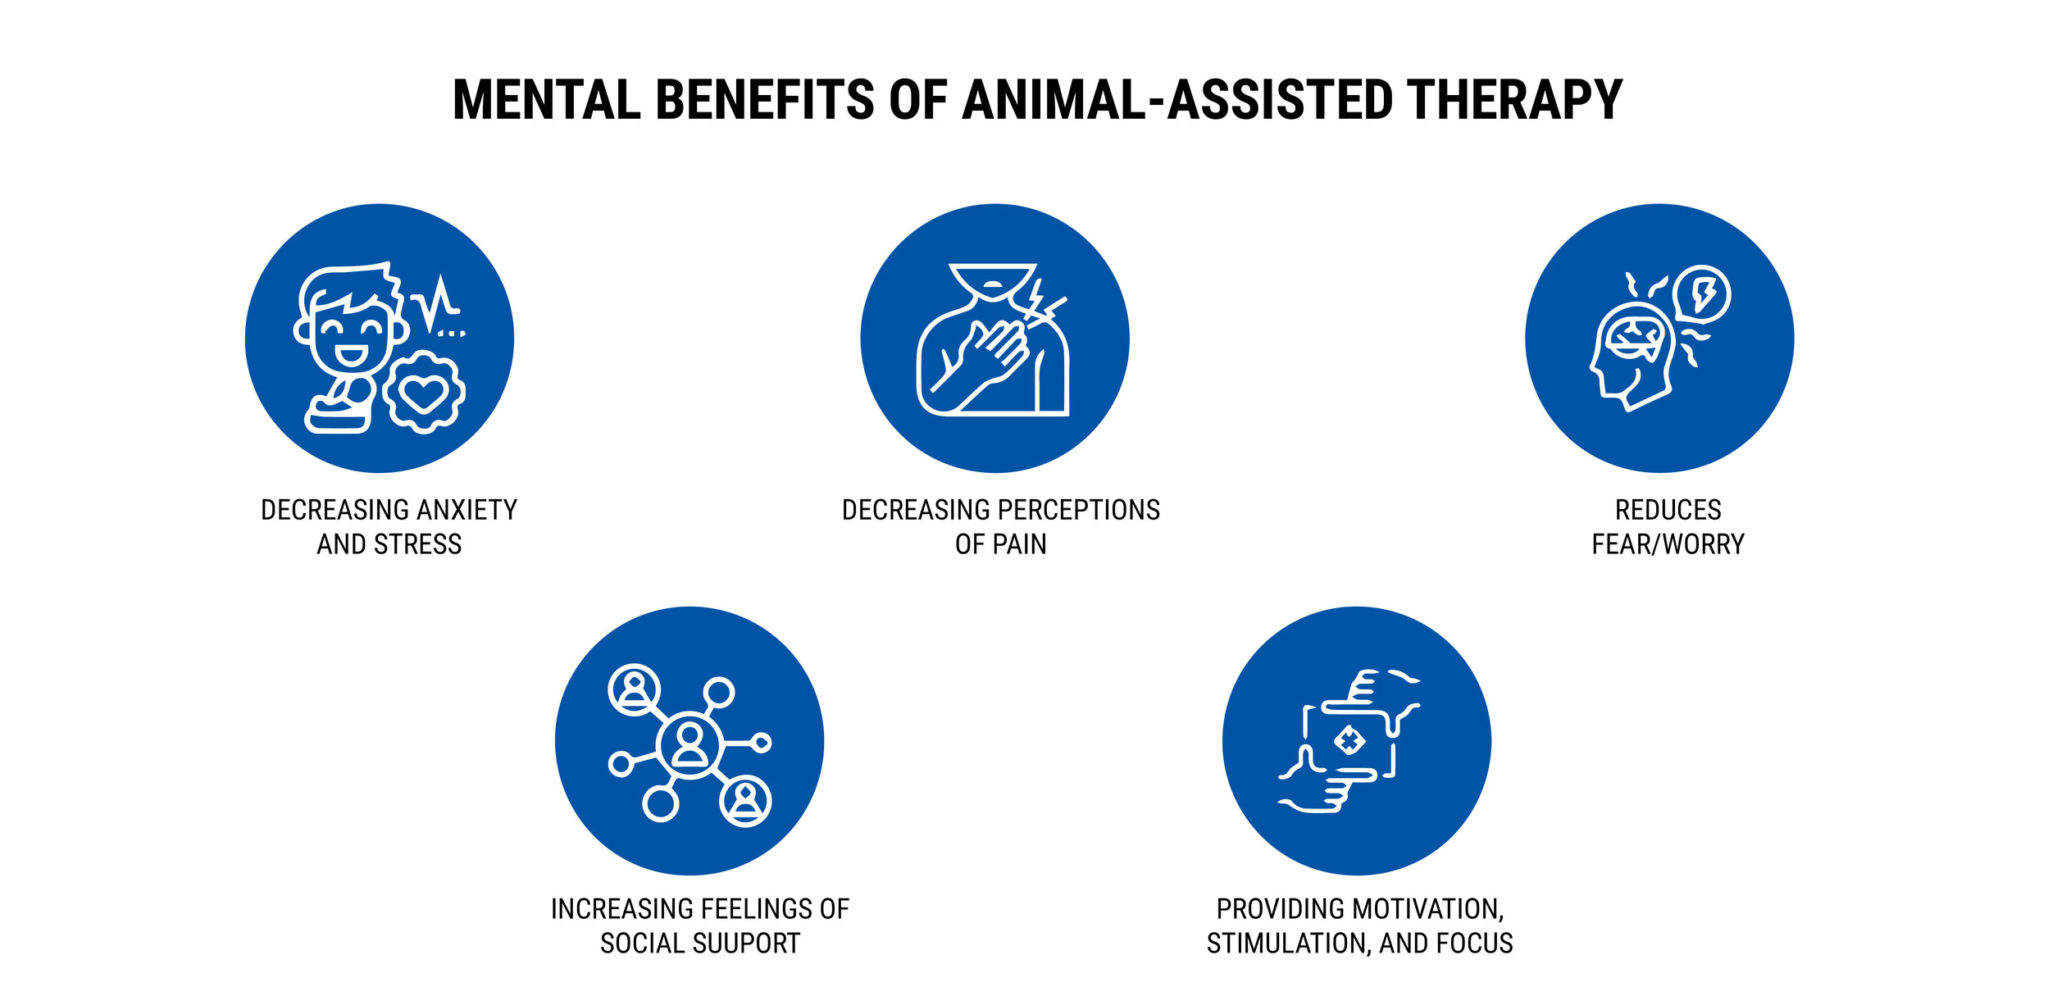 MENTAL BENEFITS OF ANIMAL-ASSISTED THERAPY